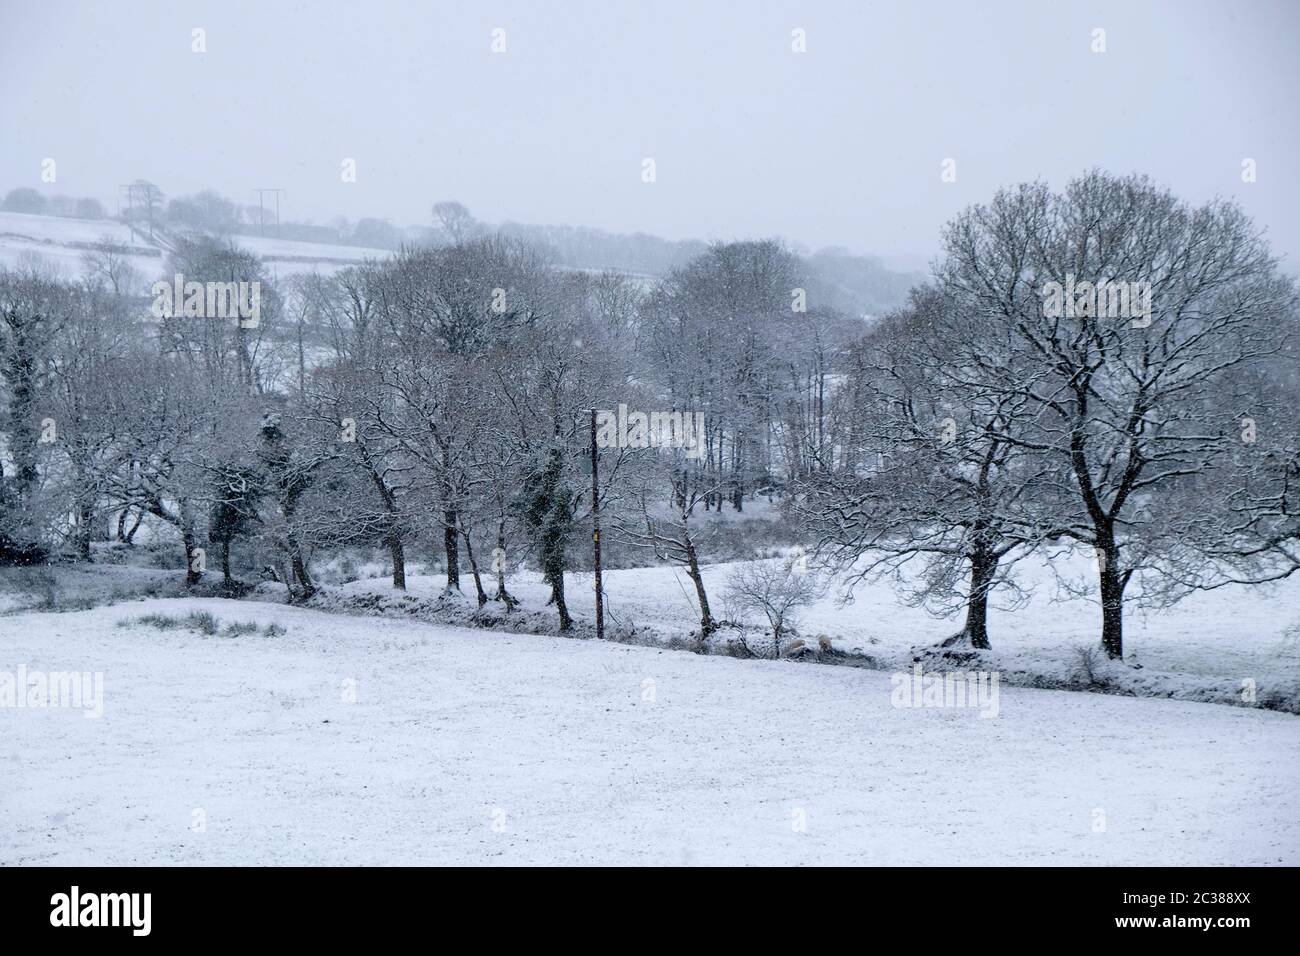 Snow scene in agricultural area, Ceredigioin, West Wales, UK Stock Photo